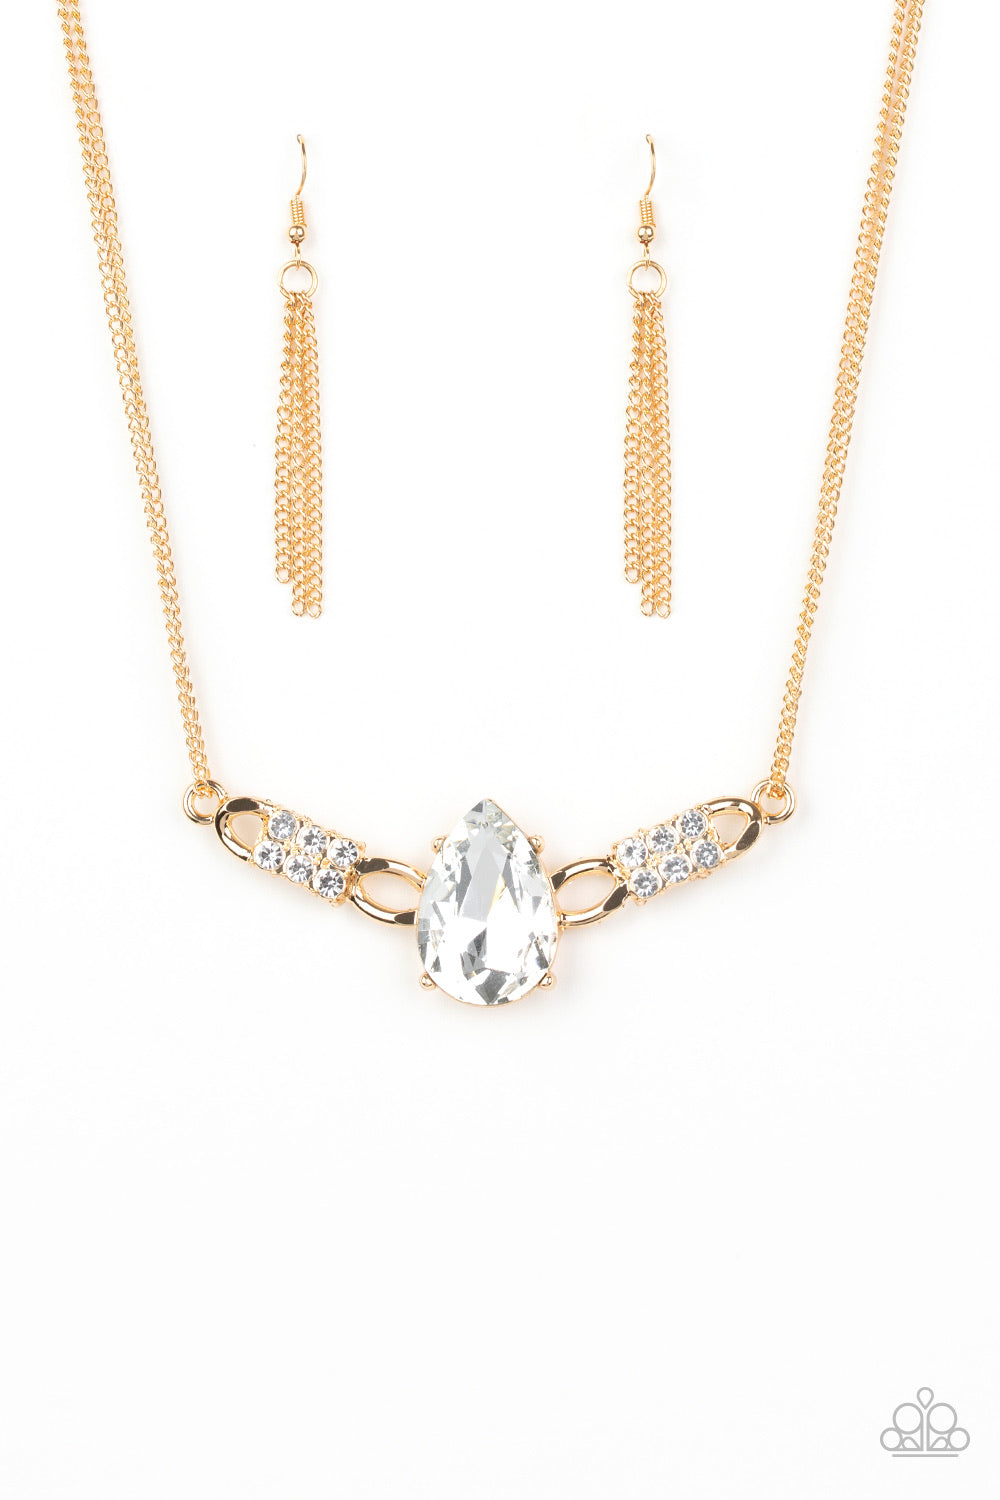 Way to make an entrance -Gold - Classy Elite Jewelry